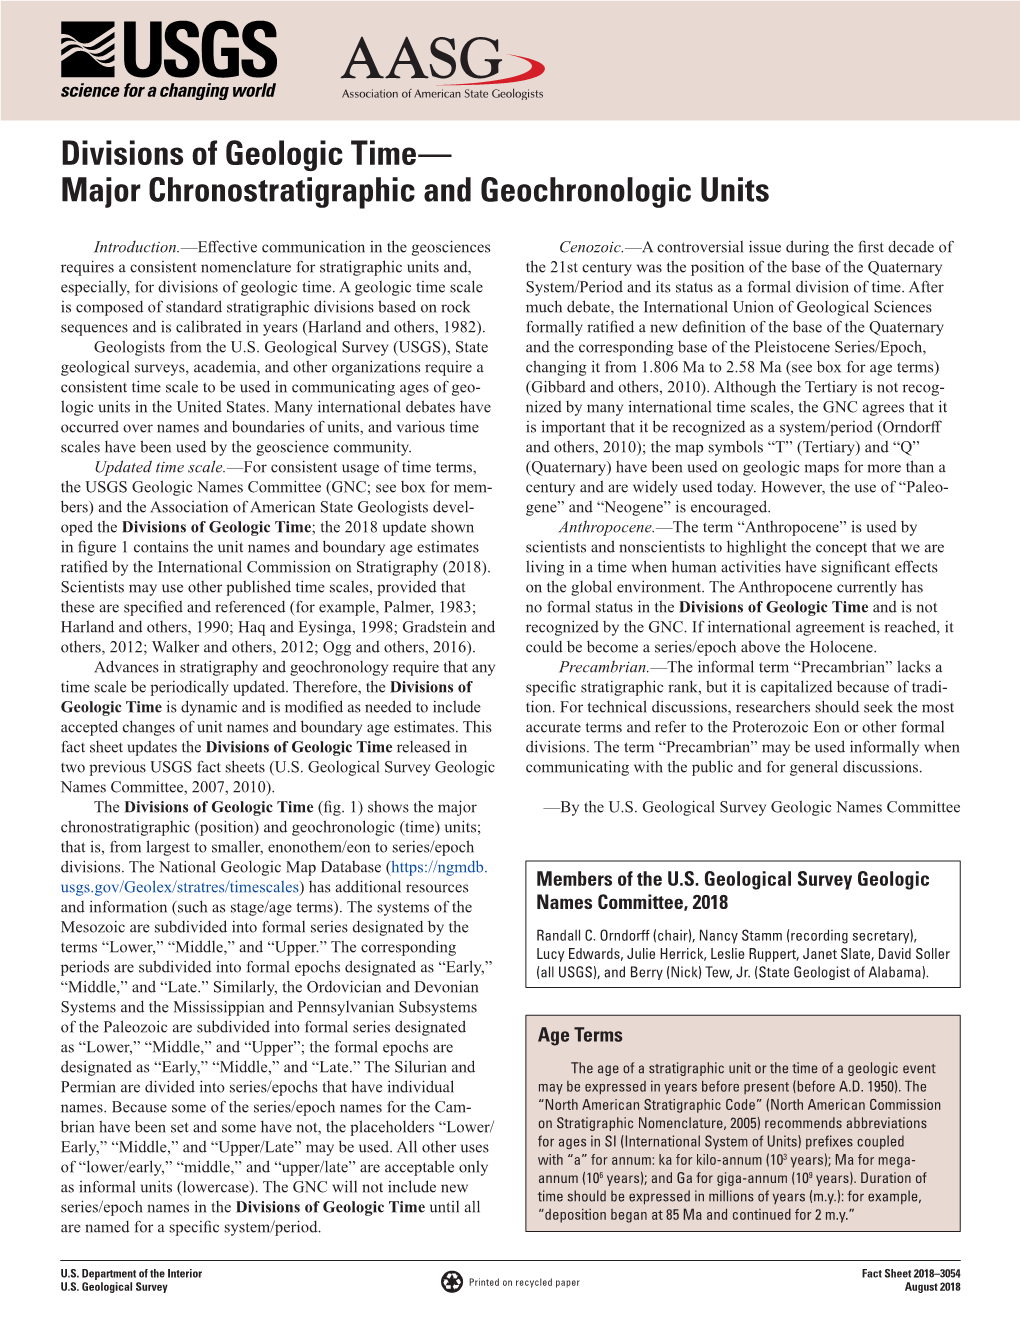 Divisions of Geologic Time— Major Chronostratigraphic and Geochronologic Units